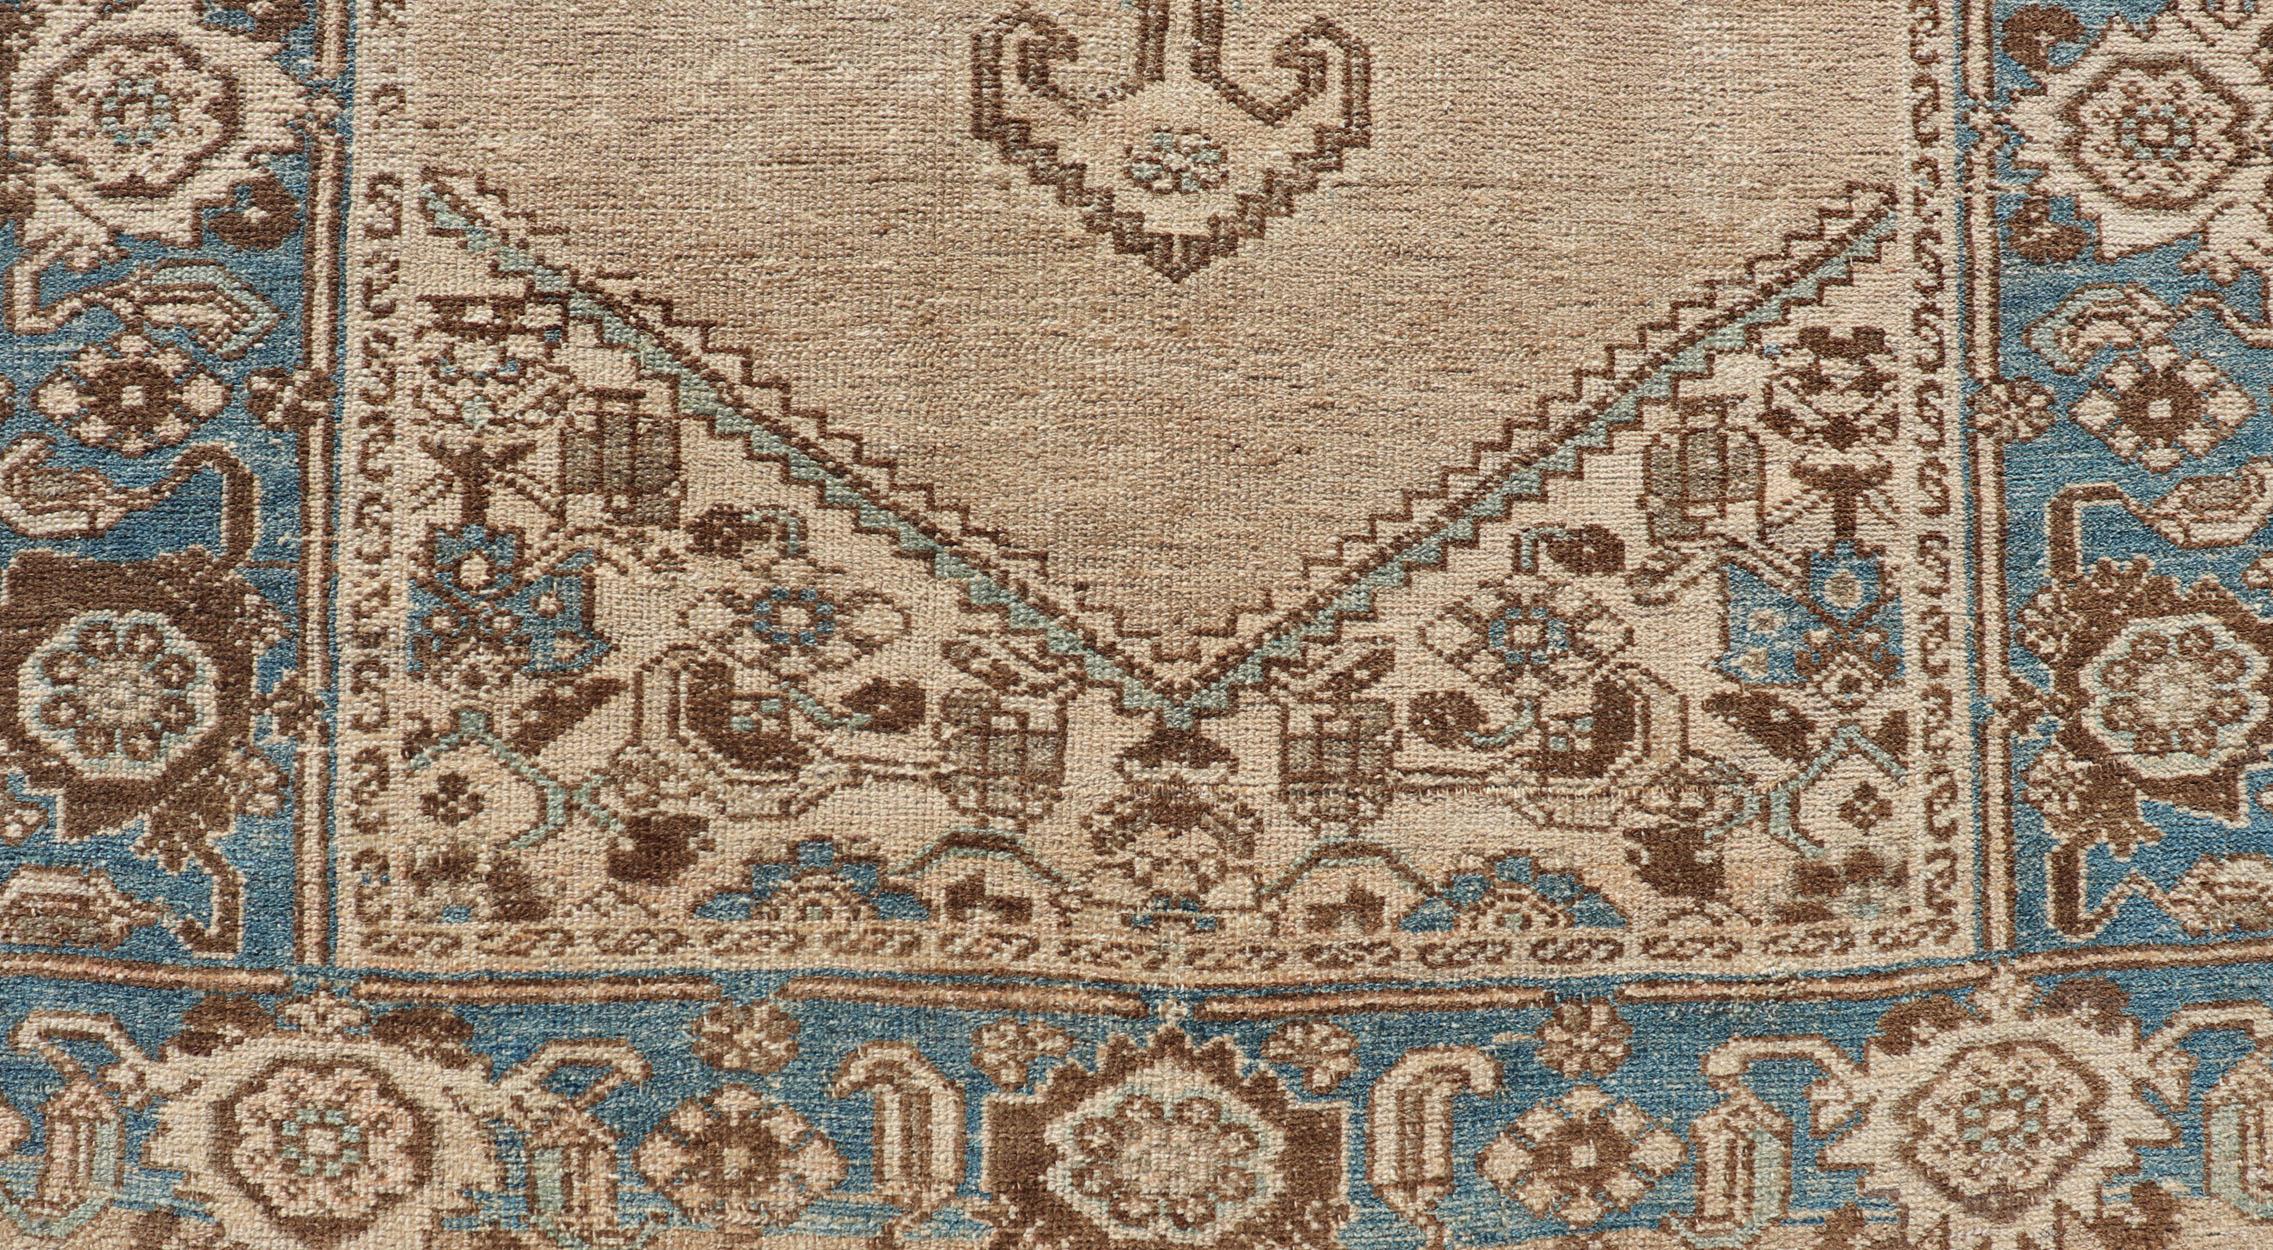 Early 20th Century Antique Persian Hamadan Rug with Medallion Design in Tan, Light Blue & Brown For Sale